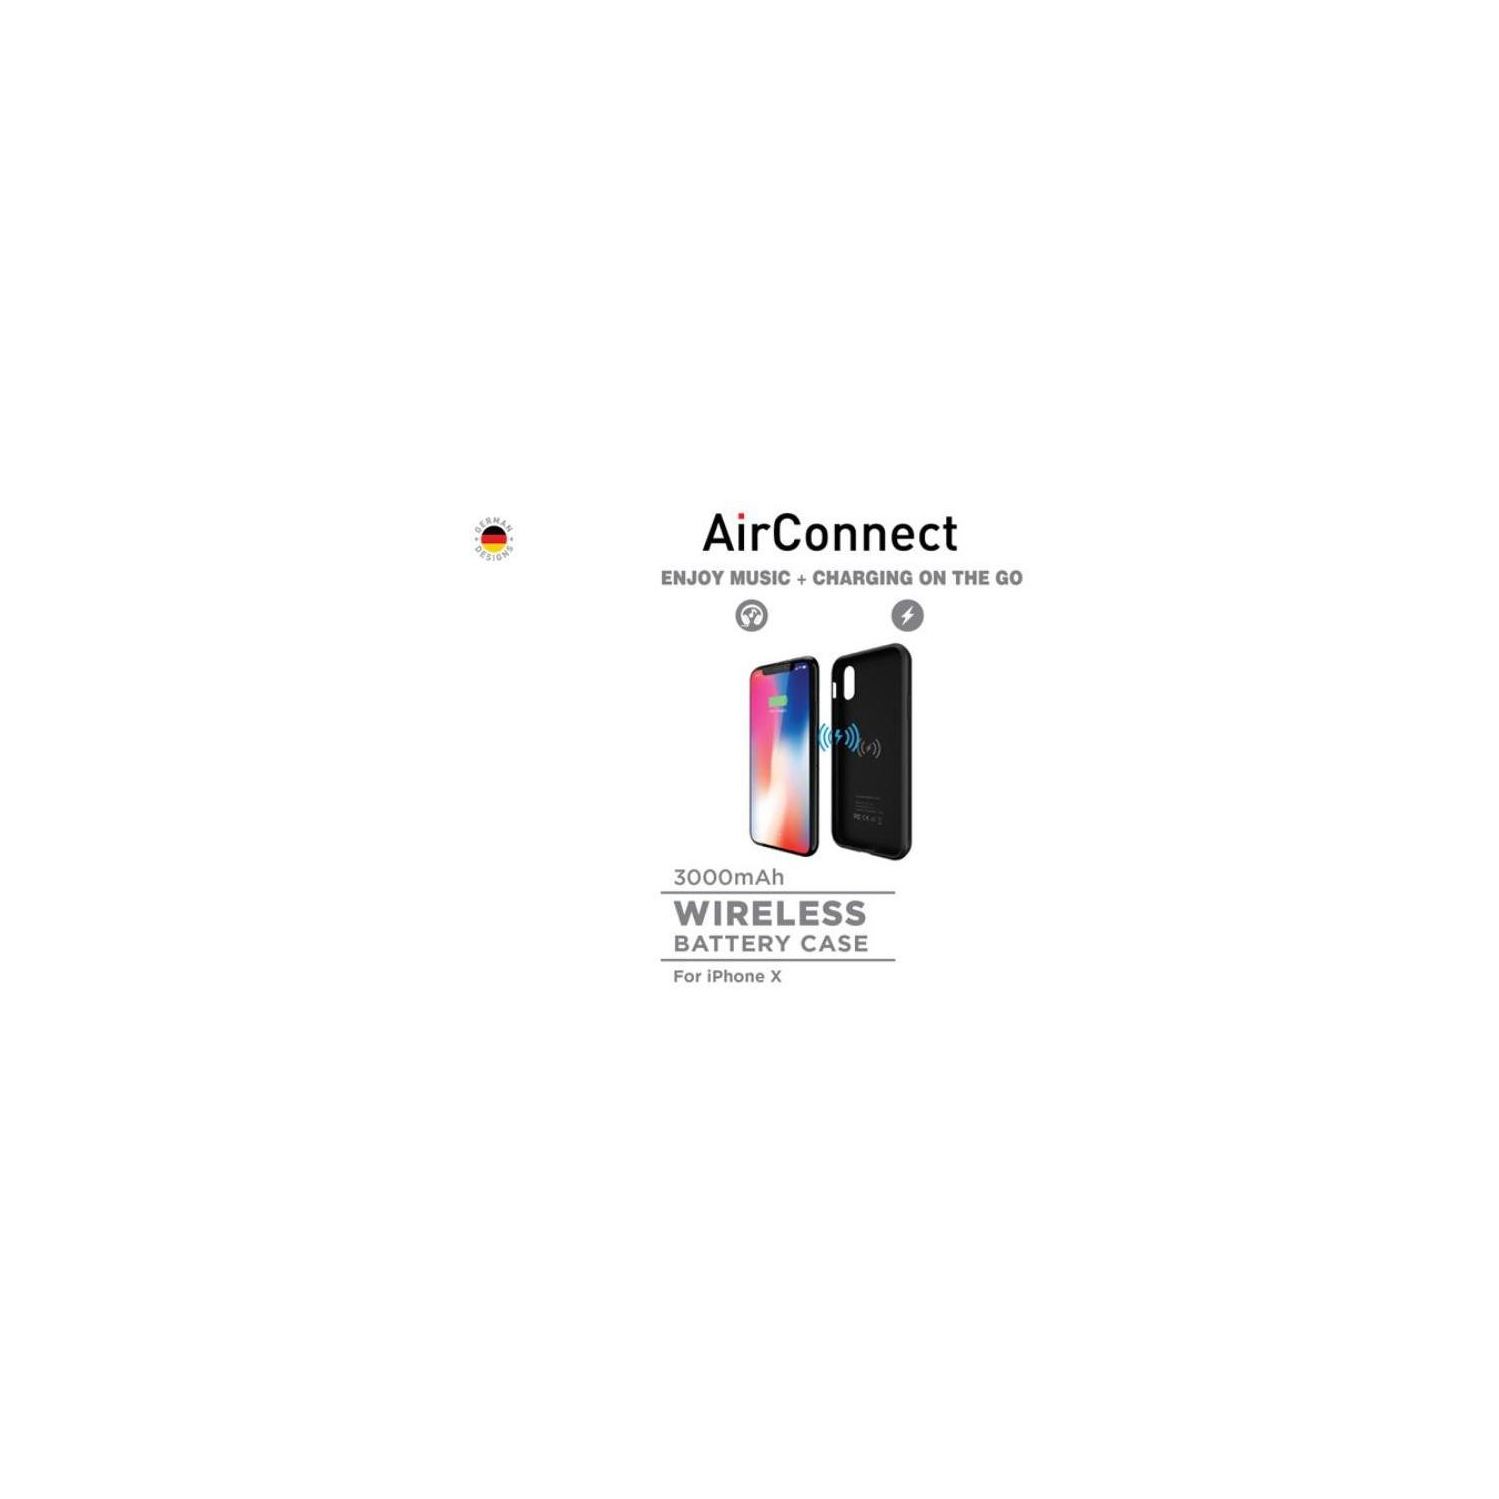 SAMA-Air Connect Wireless Battery Case for iphone X 3000 mAh Free Screen Protector - Black